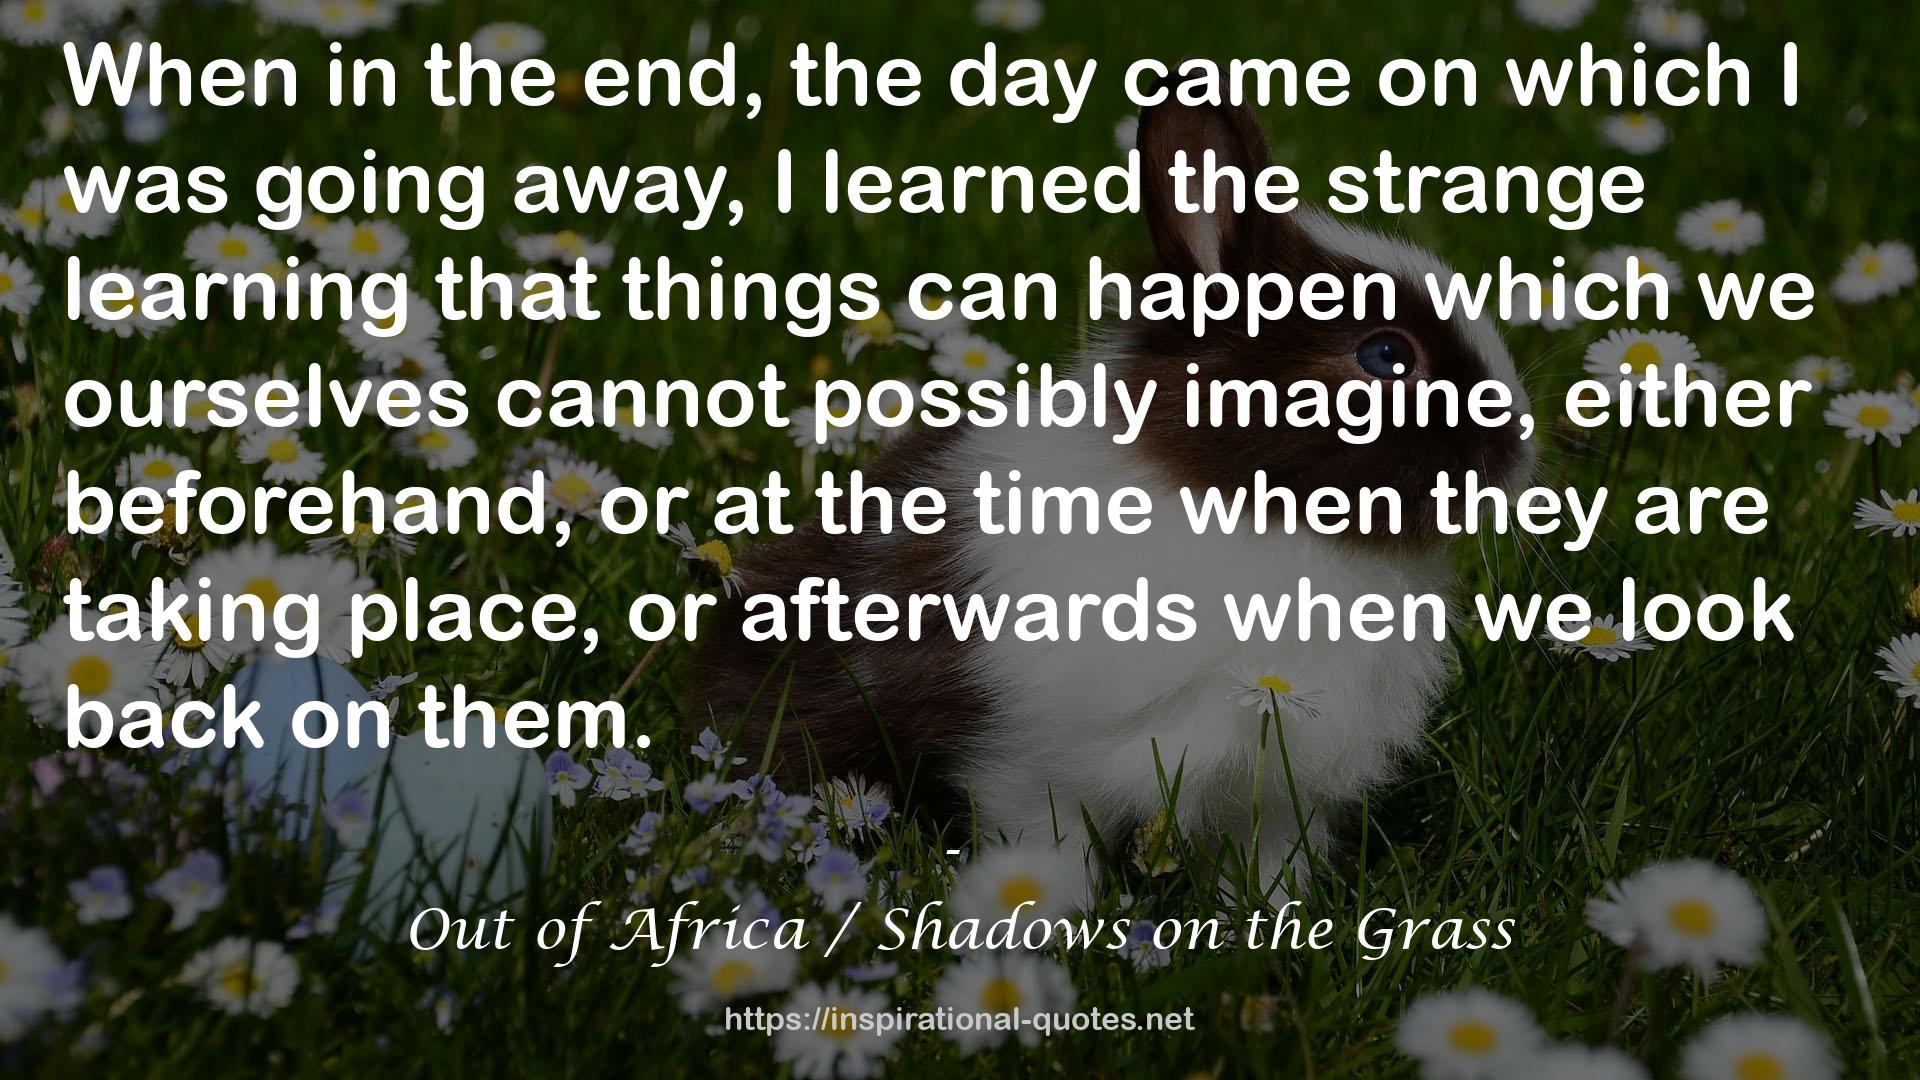 Out of Africa / Shadows on the Grass QUOTES